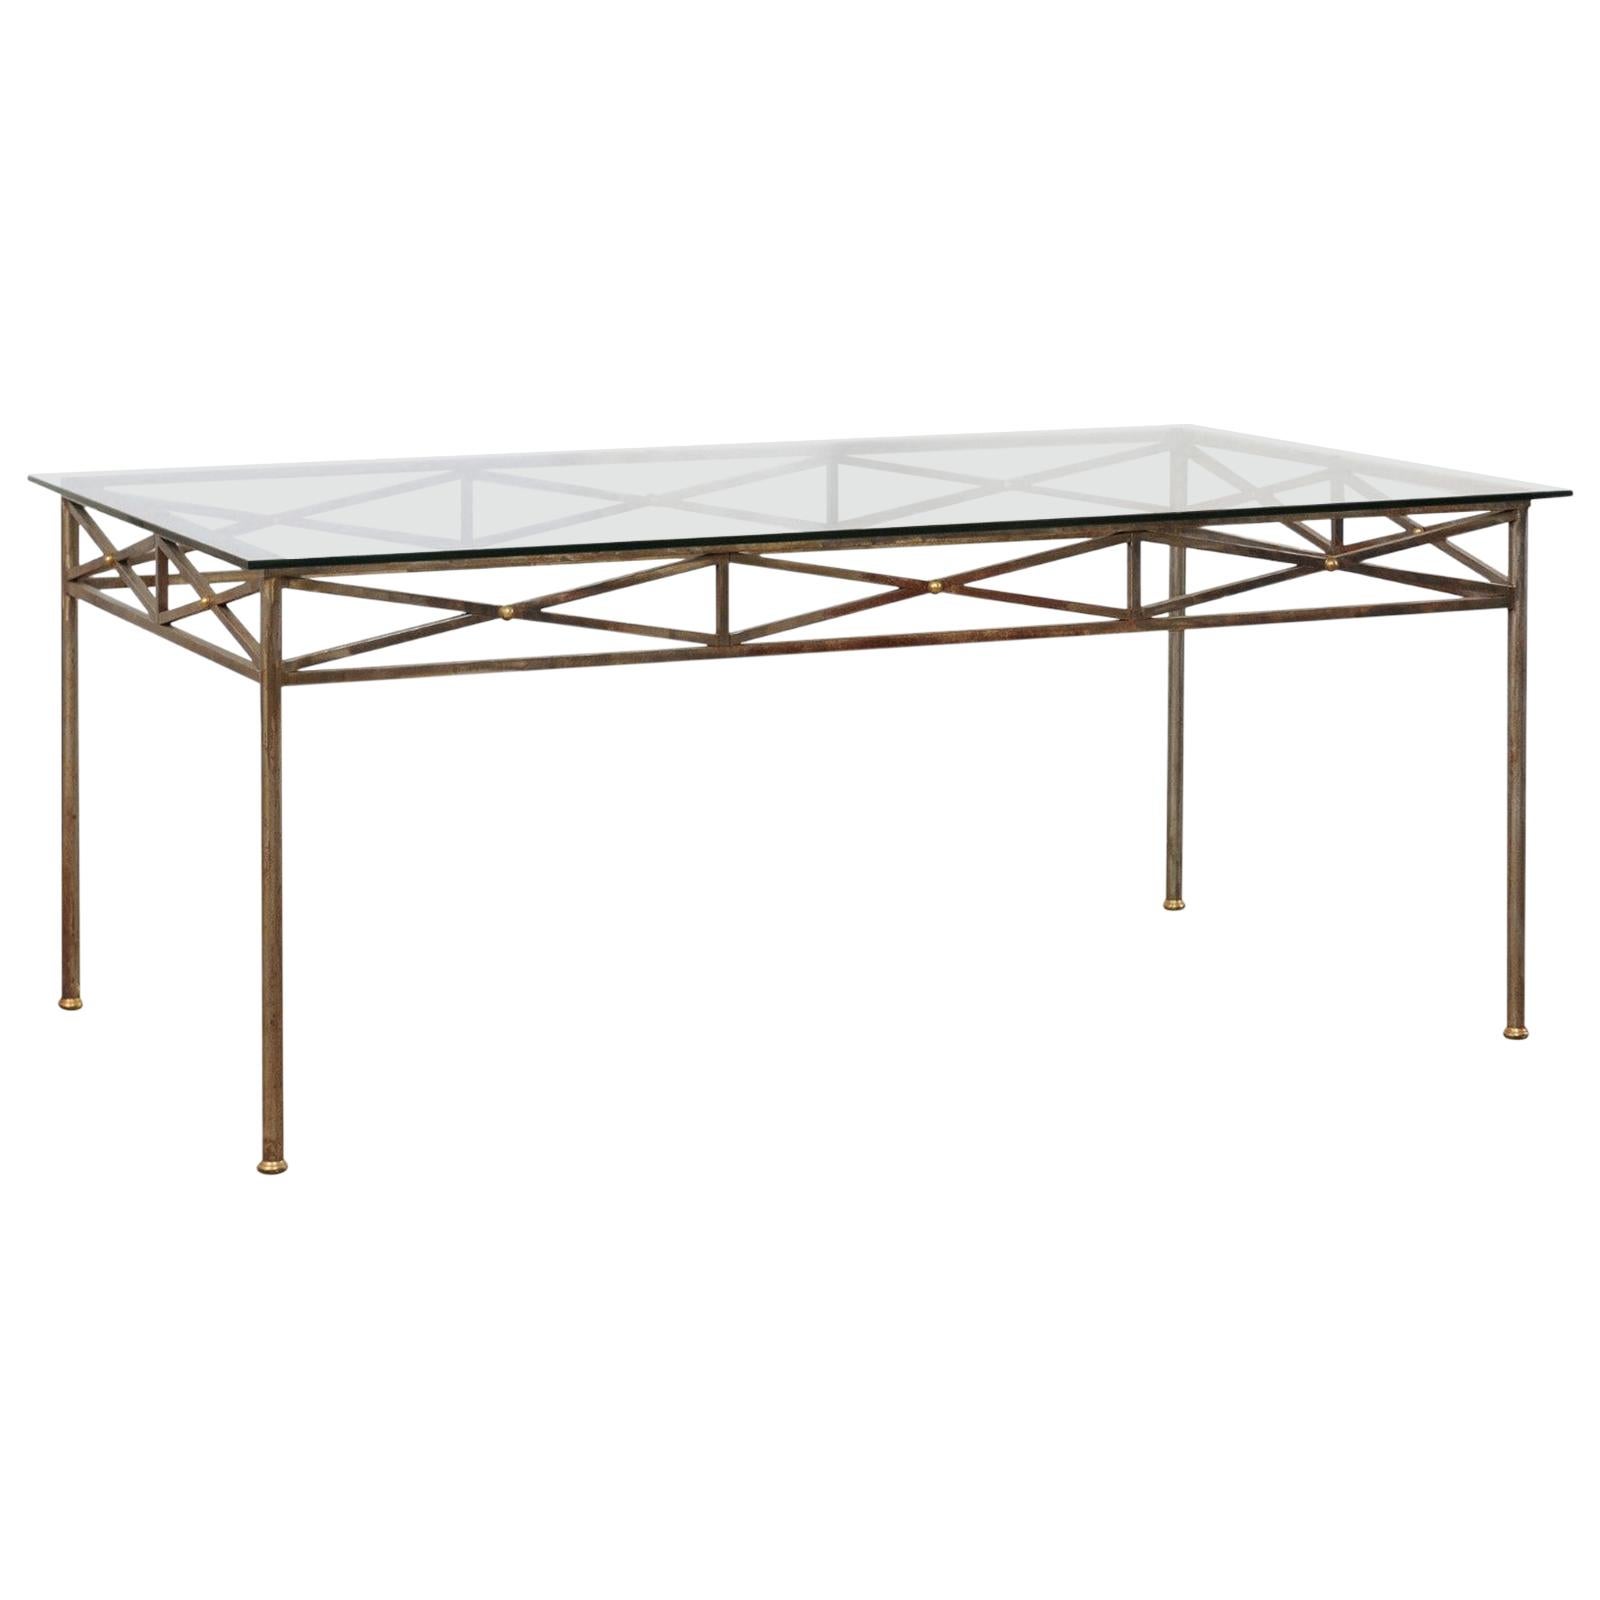 Neoclassical Inspired Metal Dining Table with Brass Accents and Glass Top